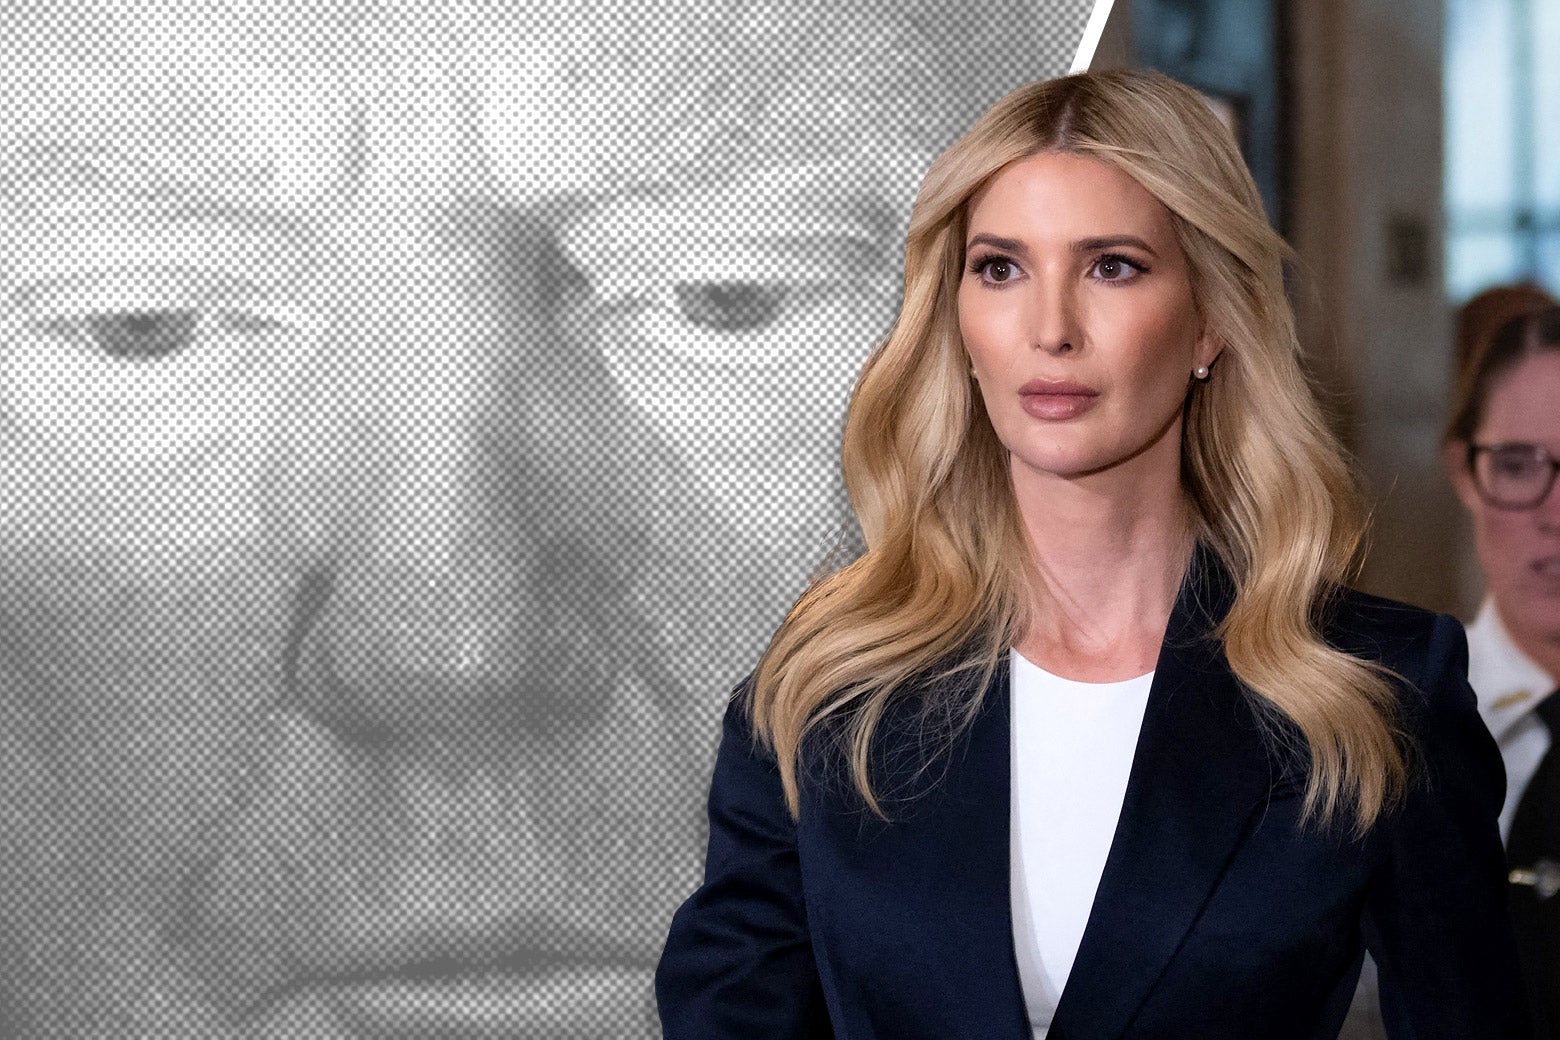 Ivanka Trump outside the courthouse, collaged with a black-and-white photo of Donald Trump.